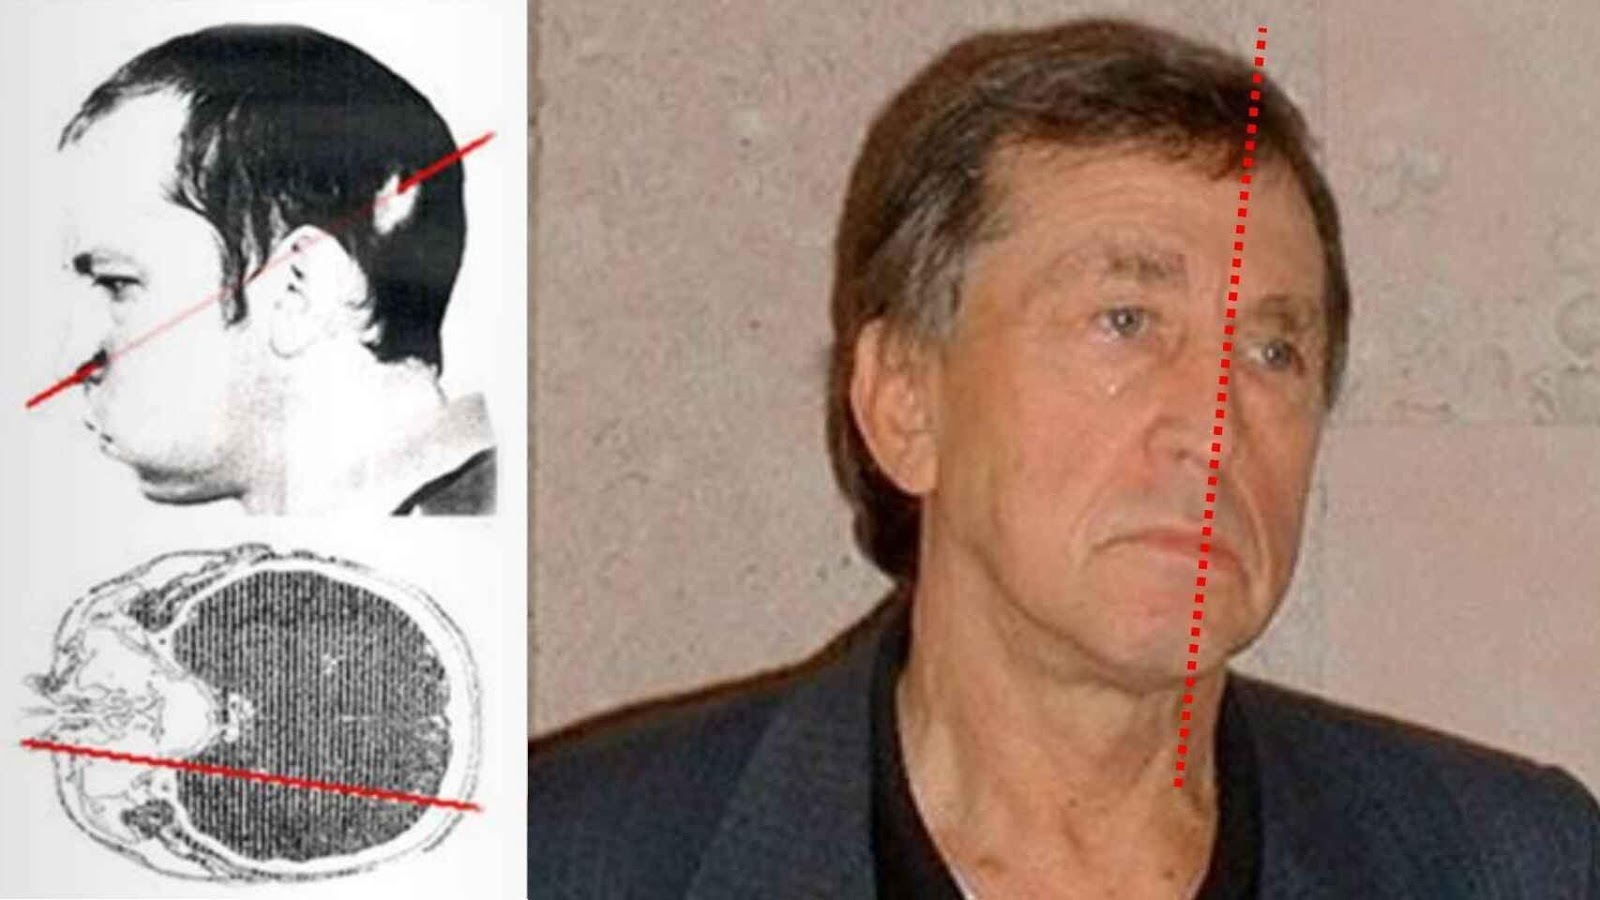 Natural wrinkles and signs of aging are visible on one side of Anatoly's face, but not on the other.